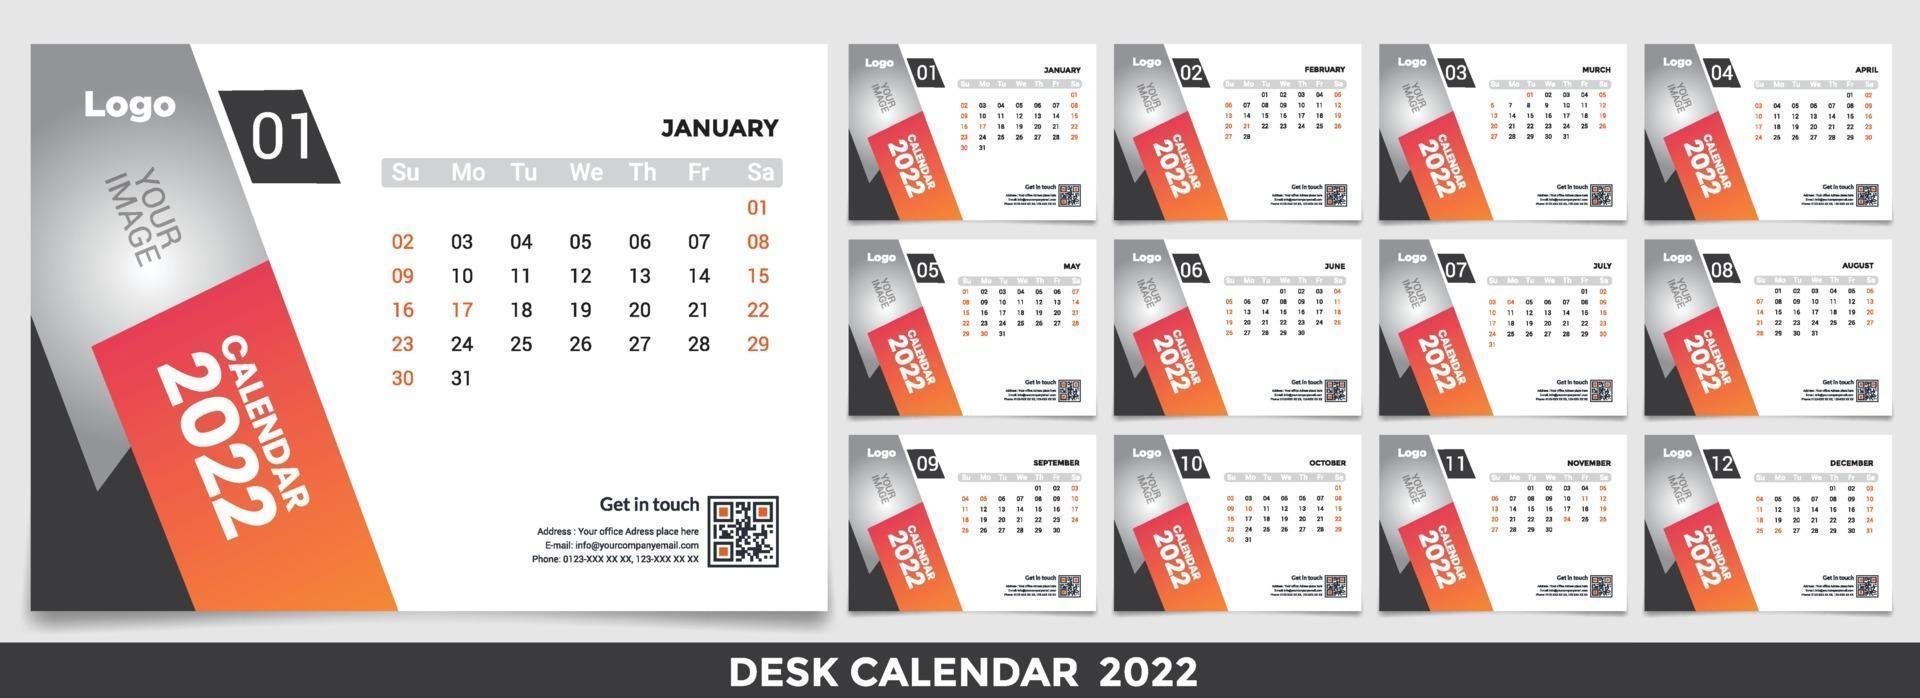 Calendar 2022, Set Desk Calendar template design with Place for Photo and Company Logo. The week Monday on Sunday. Set of 12 Months vector